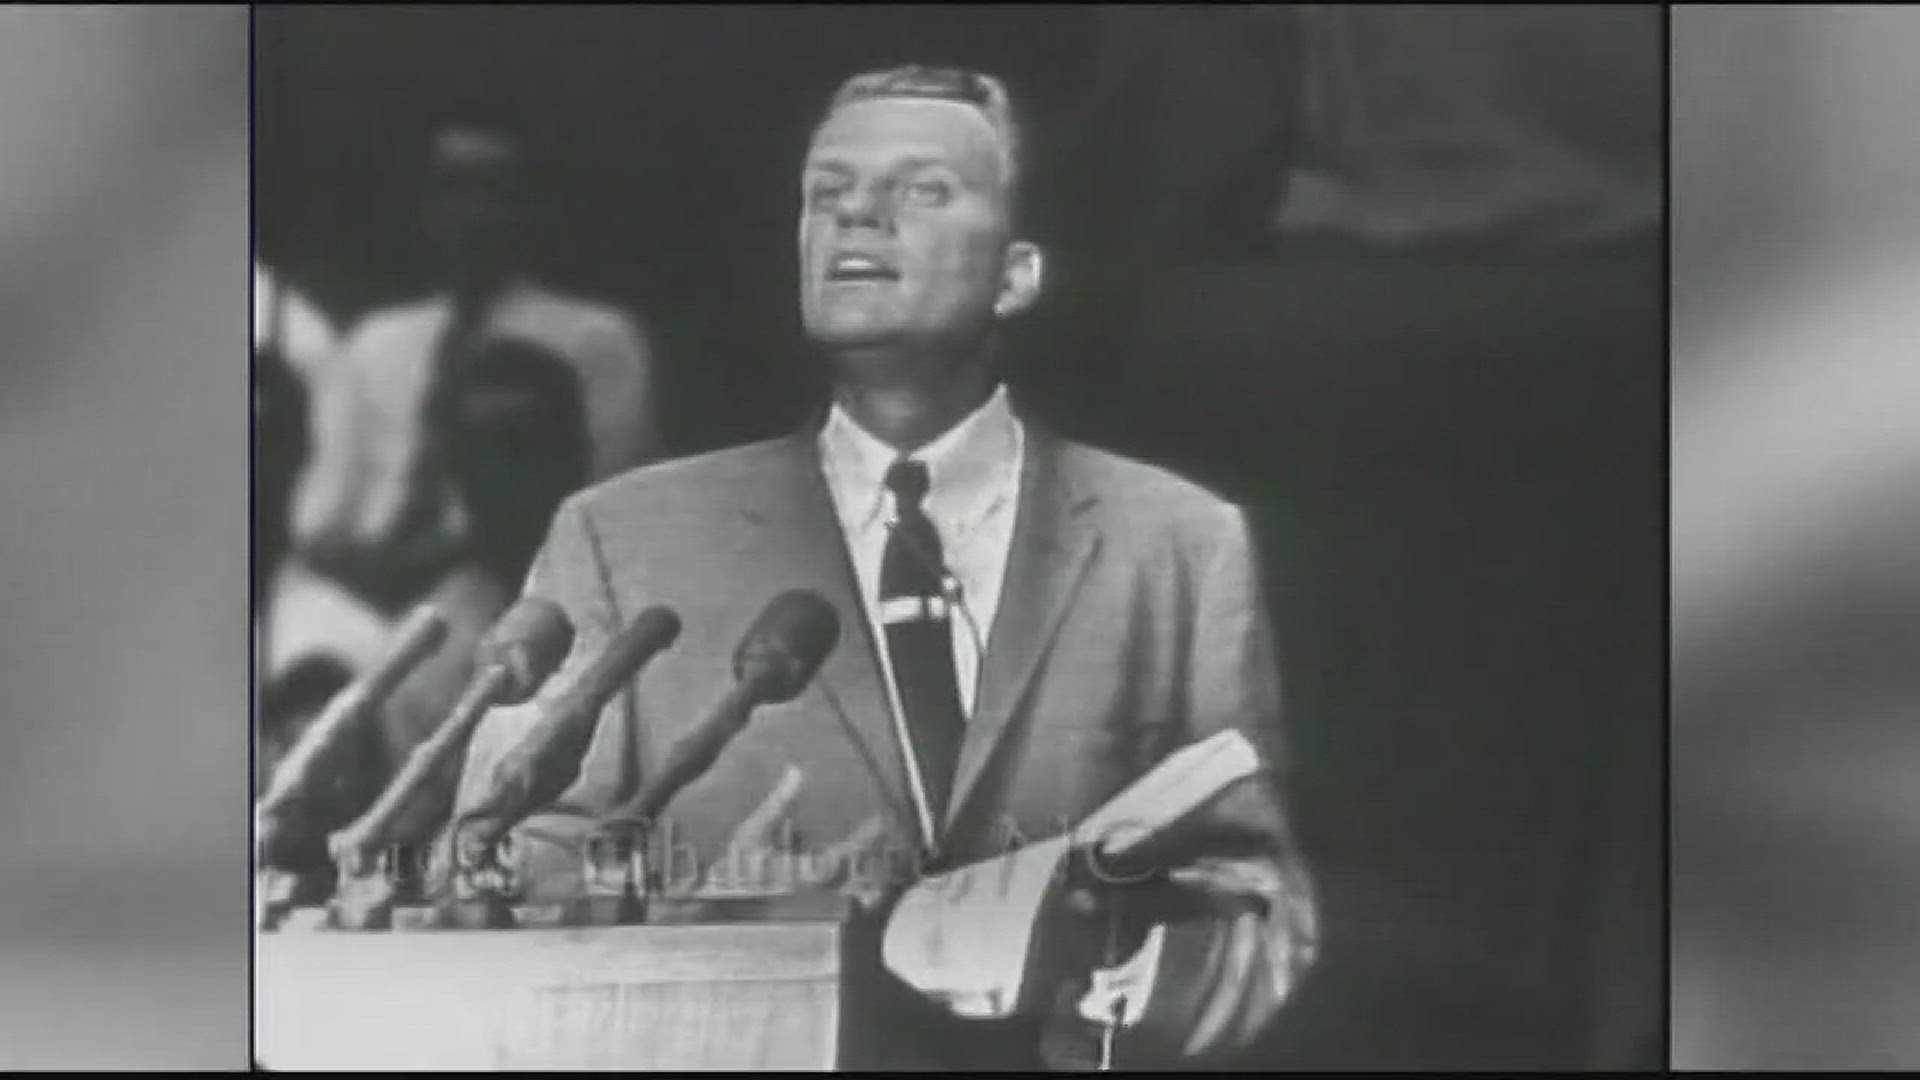 Remembering the late Rev. Billy Graham